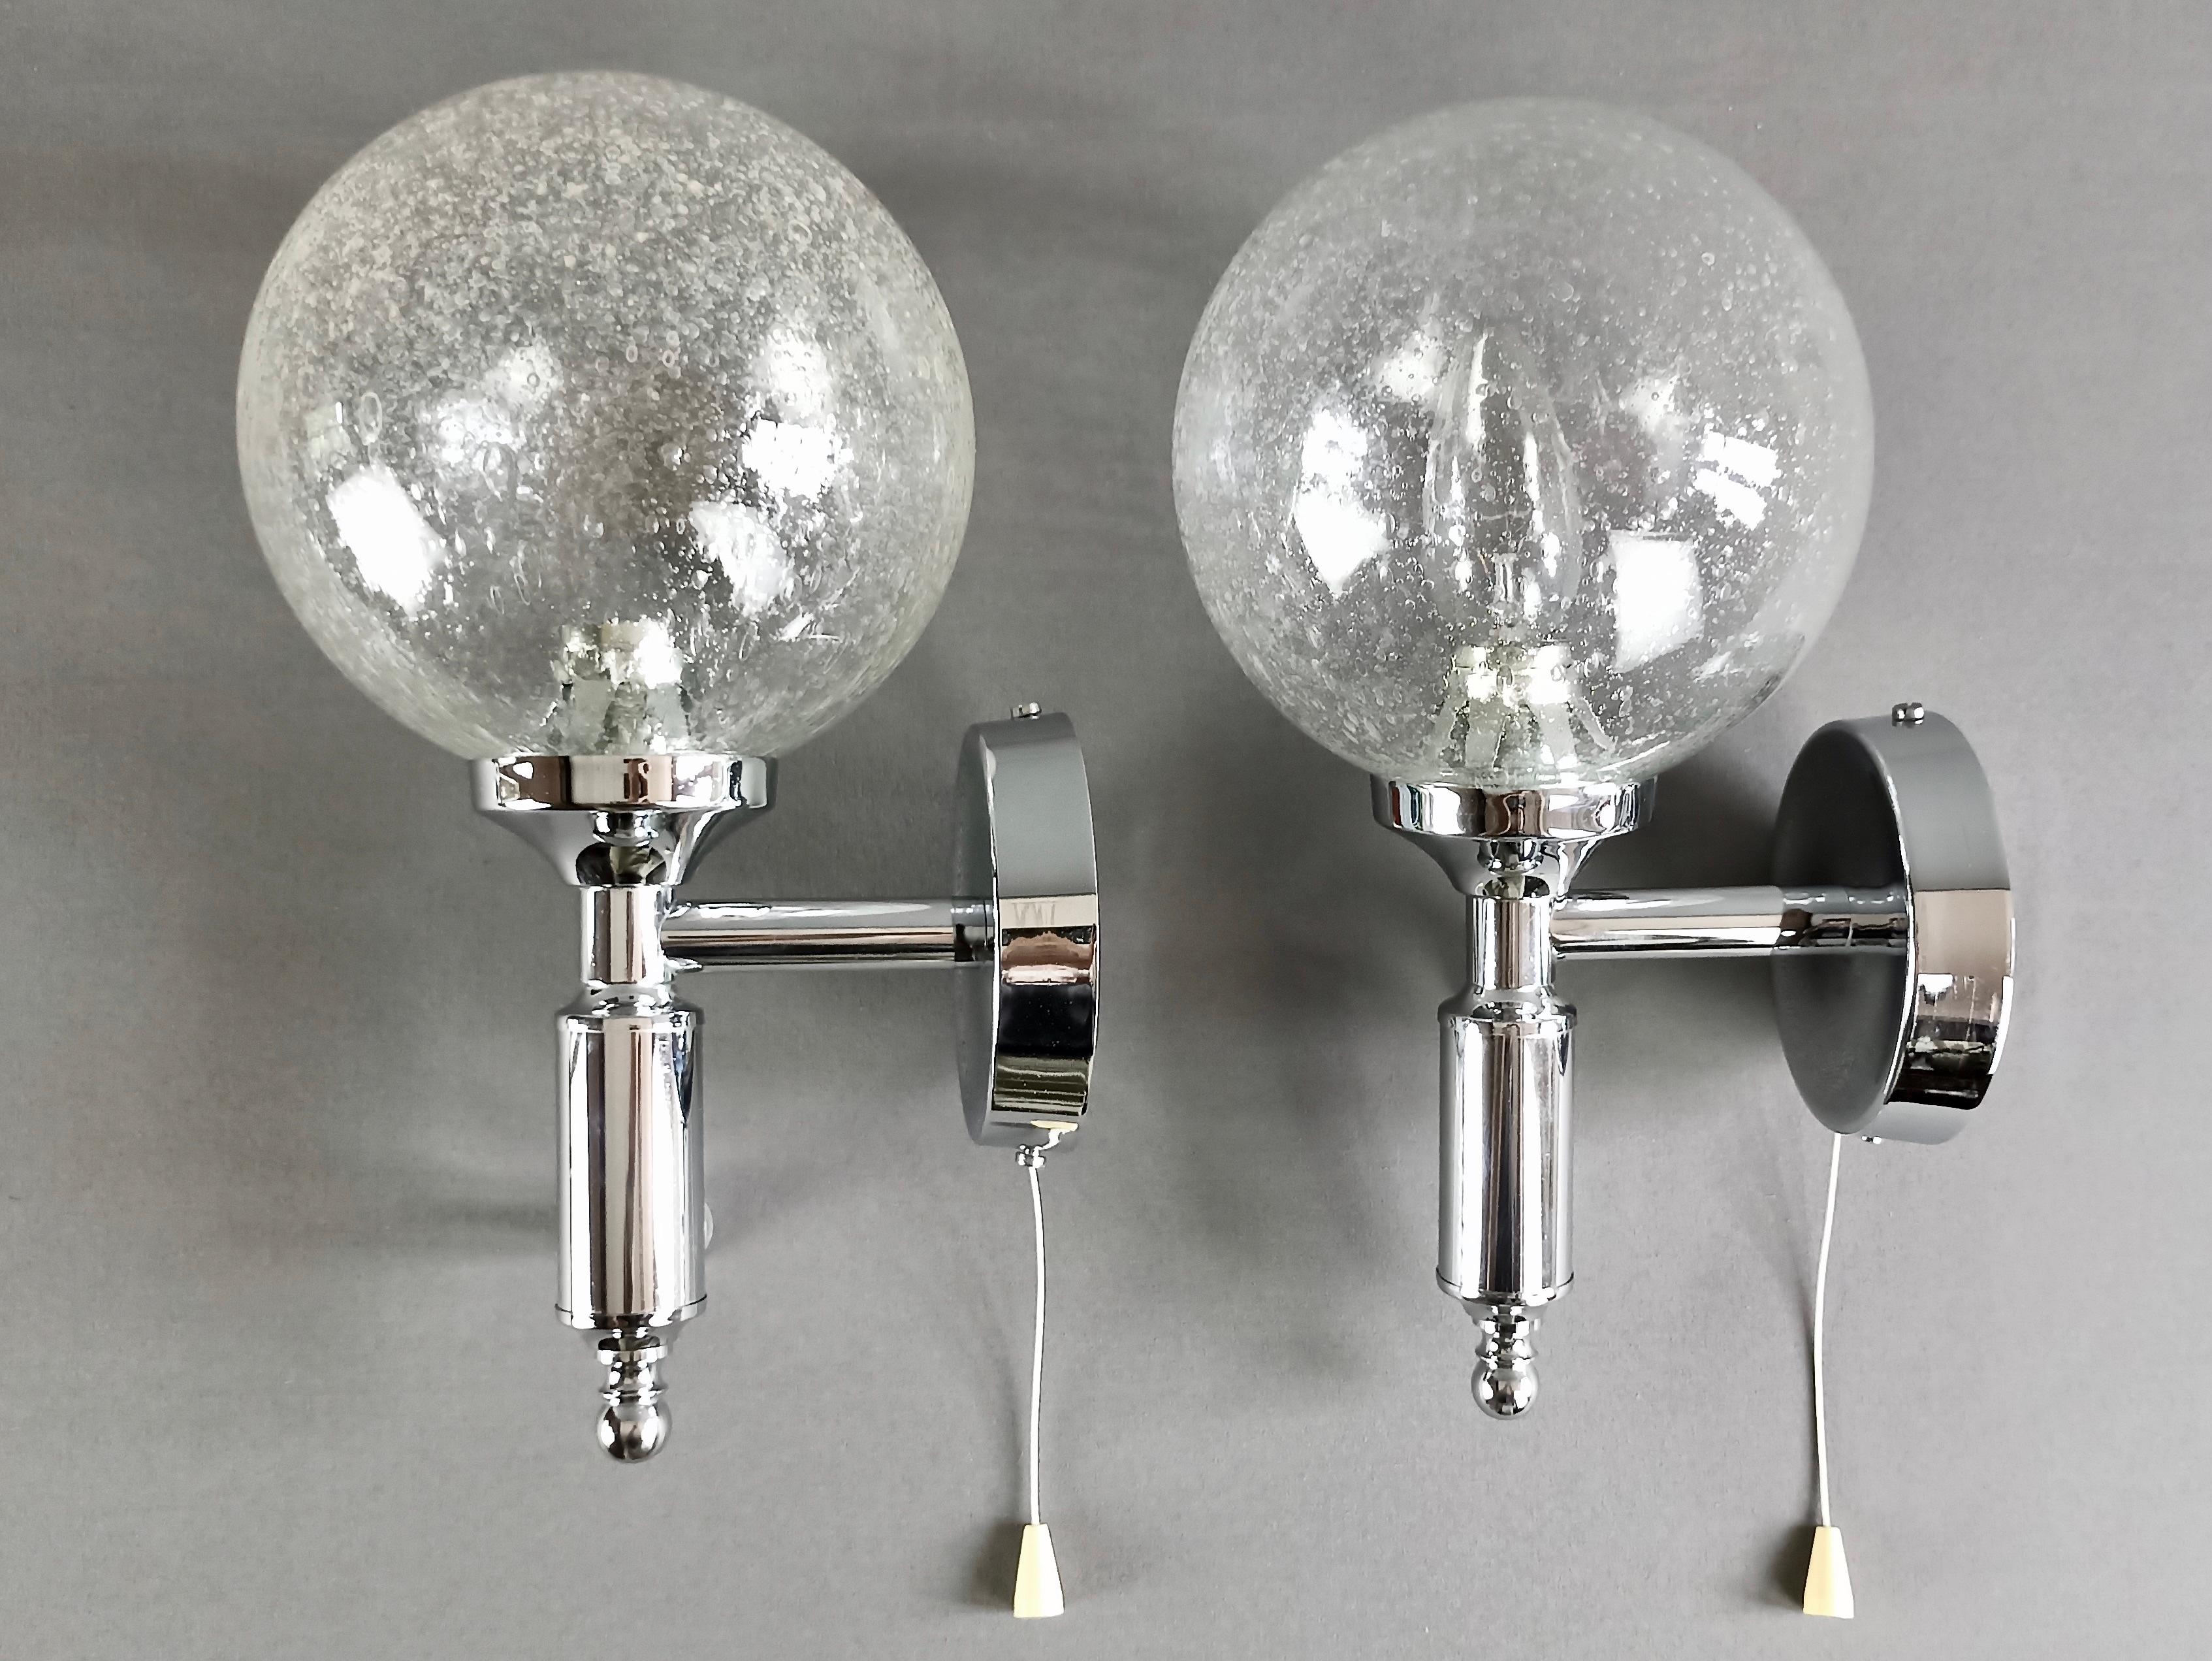 Beautiful pair of wall lamps from the 1970s, in chrome-plated metal and spherical Murano glass shades with Pulegoso work.
This particular type of glass, called 'Pulegoso' in Murano glassworks, is characterised by innumerable tiny, irregular air